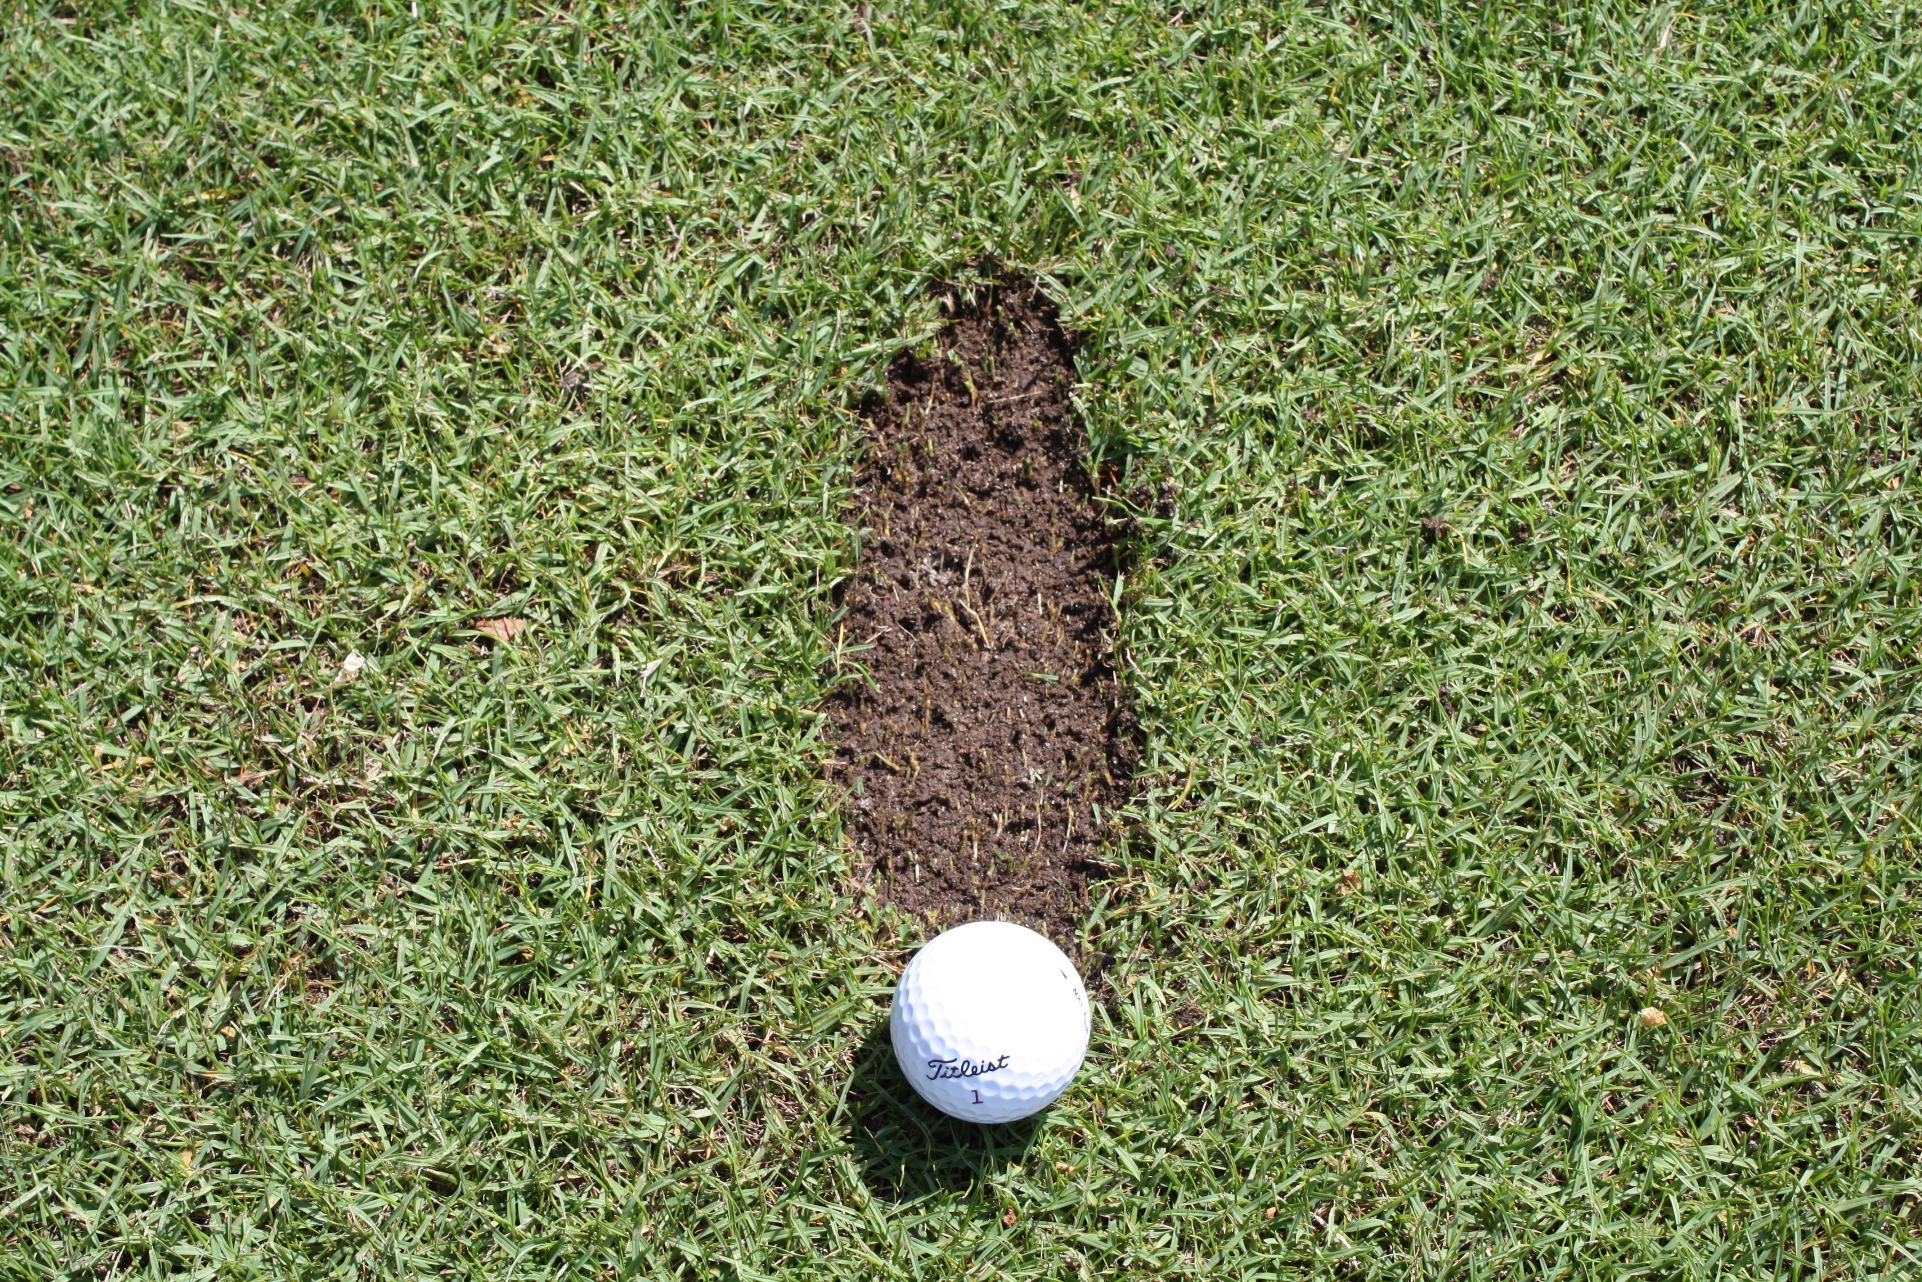 A Correctly Positioned Divot